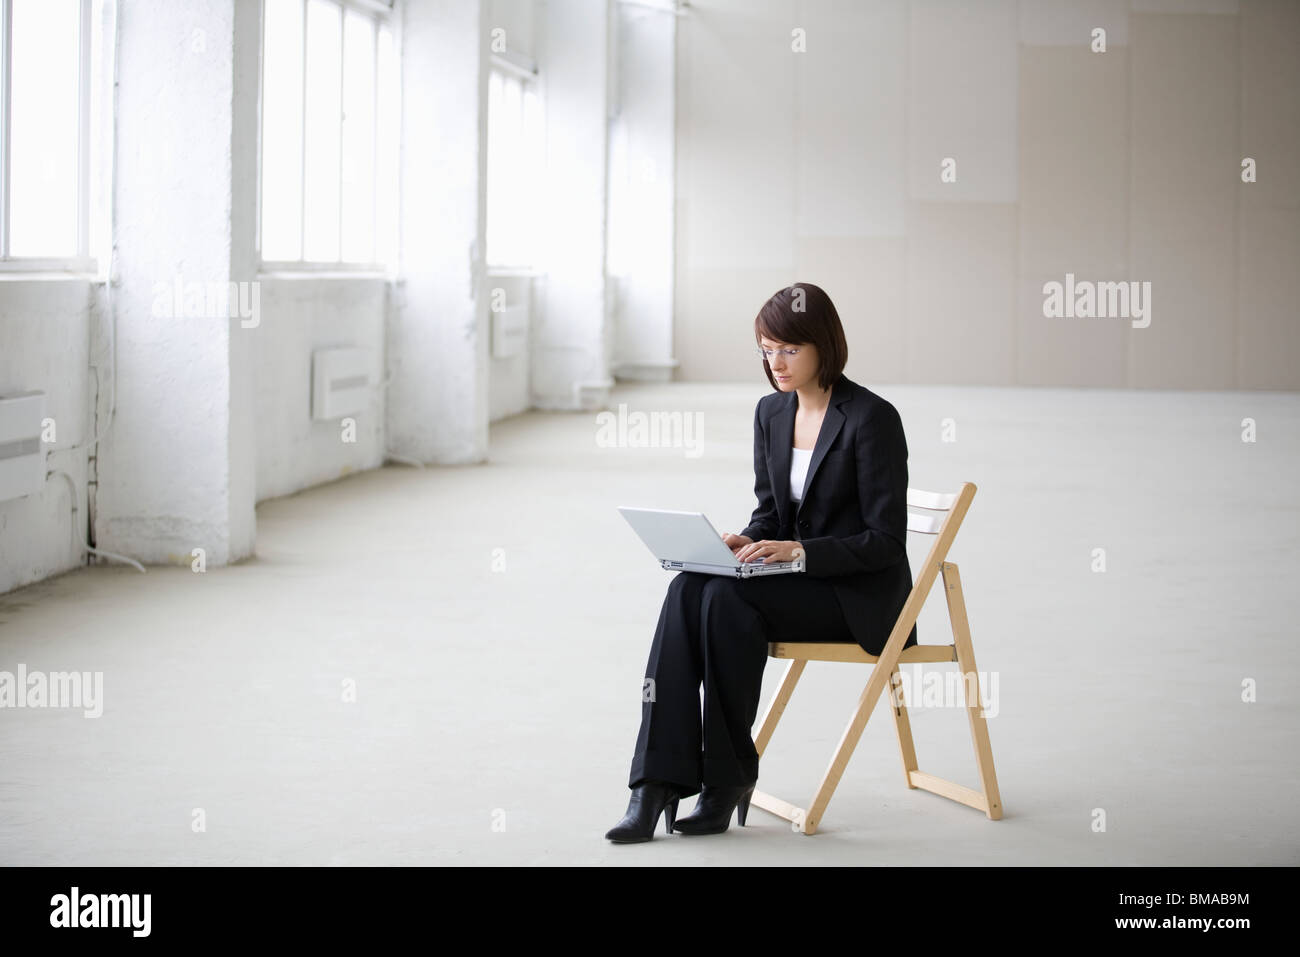 Business woman works on laptop in empty warehouse Stock Photo